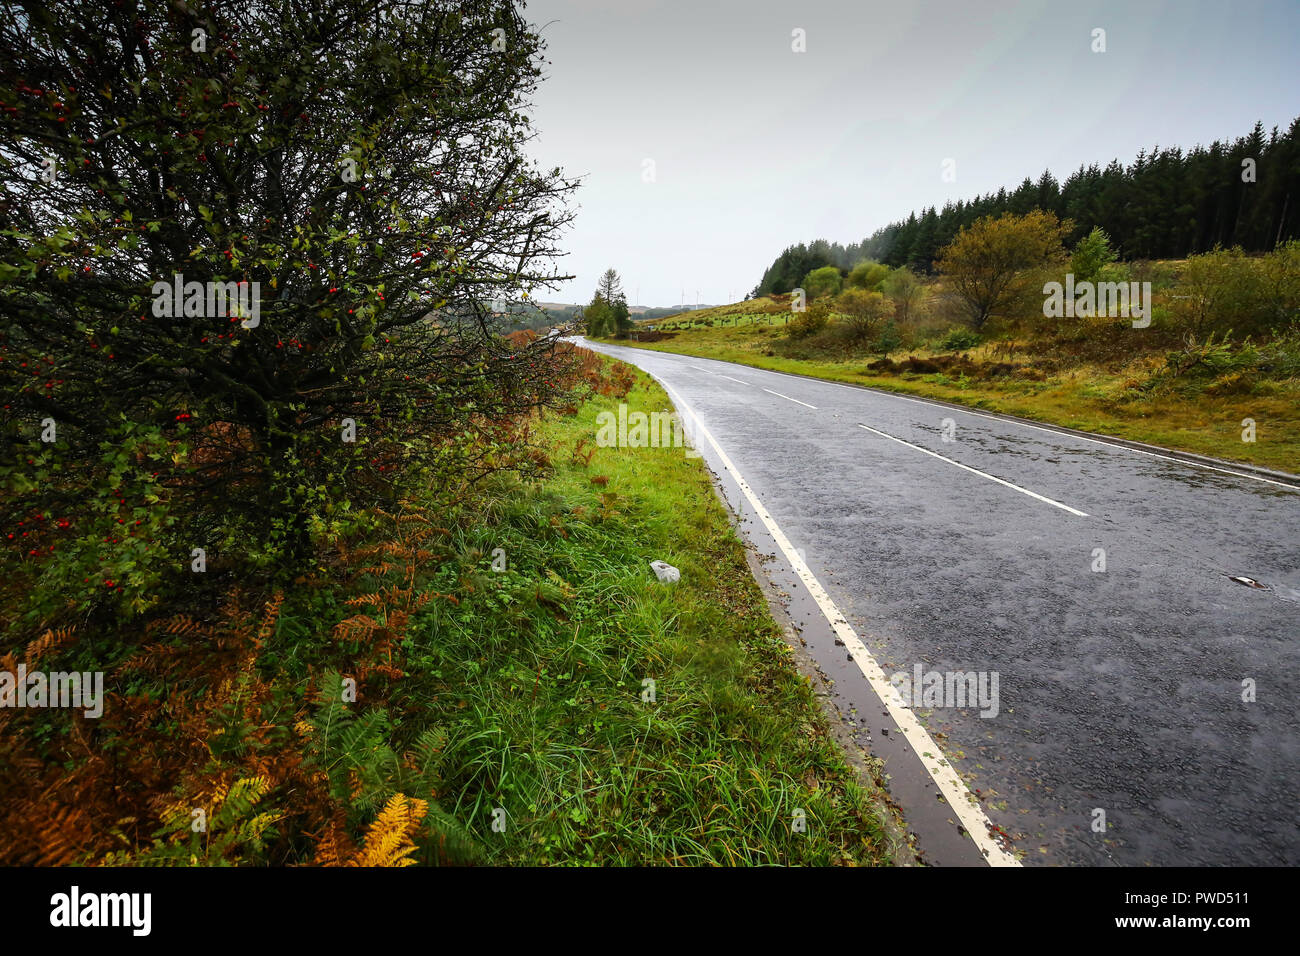 Image of damp road leading to left hand side with tree in foreground Stock Photo